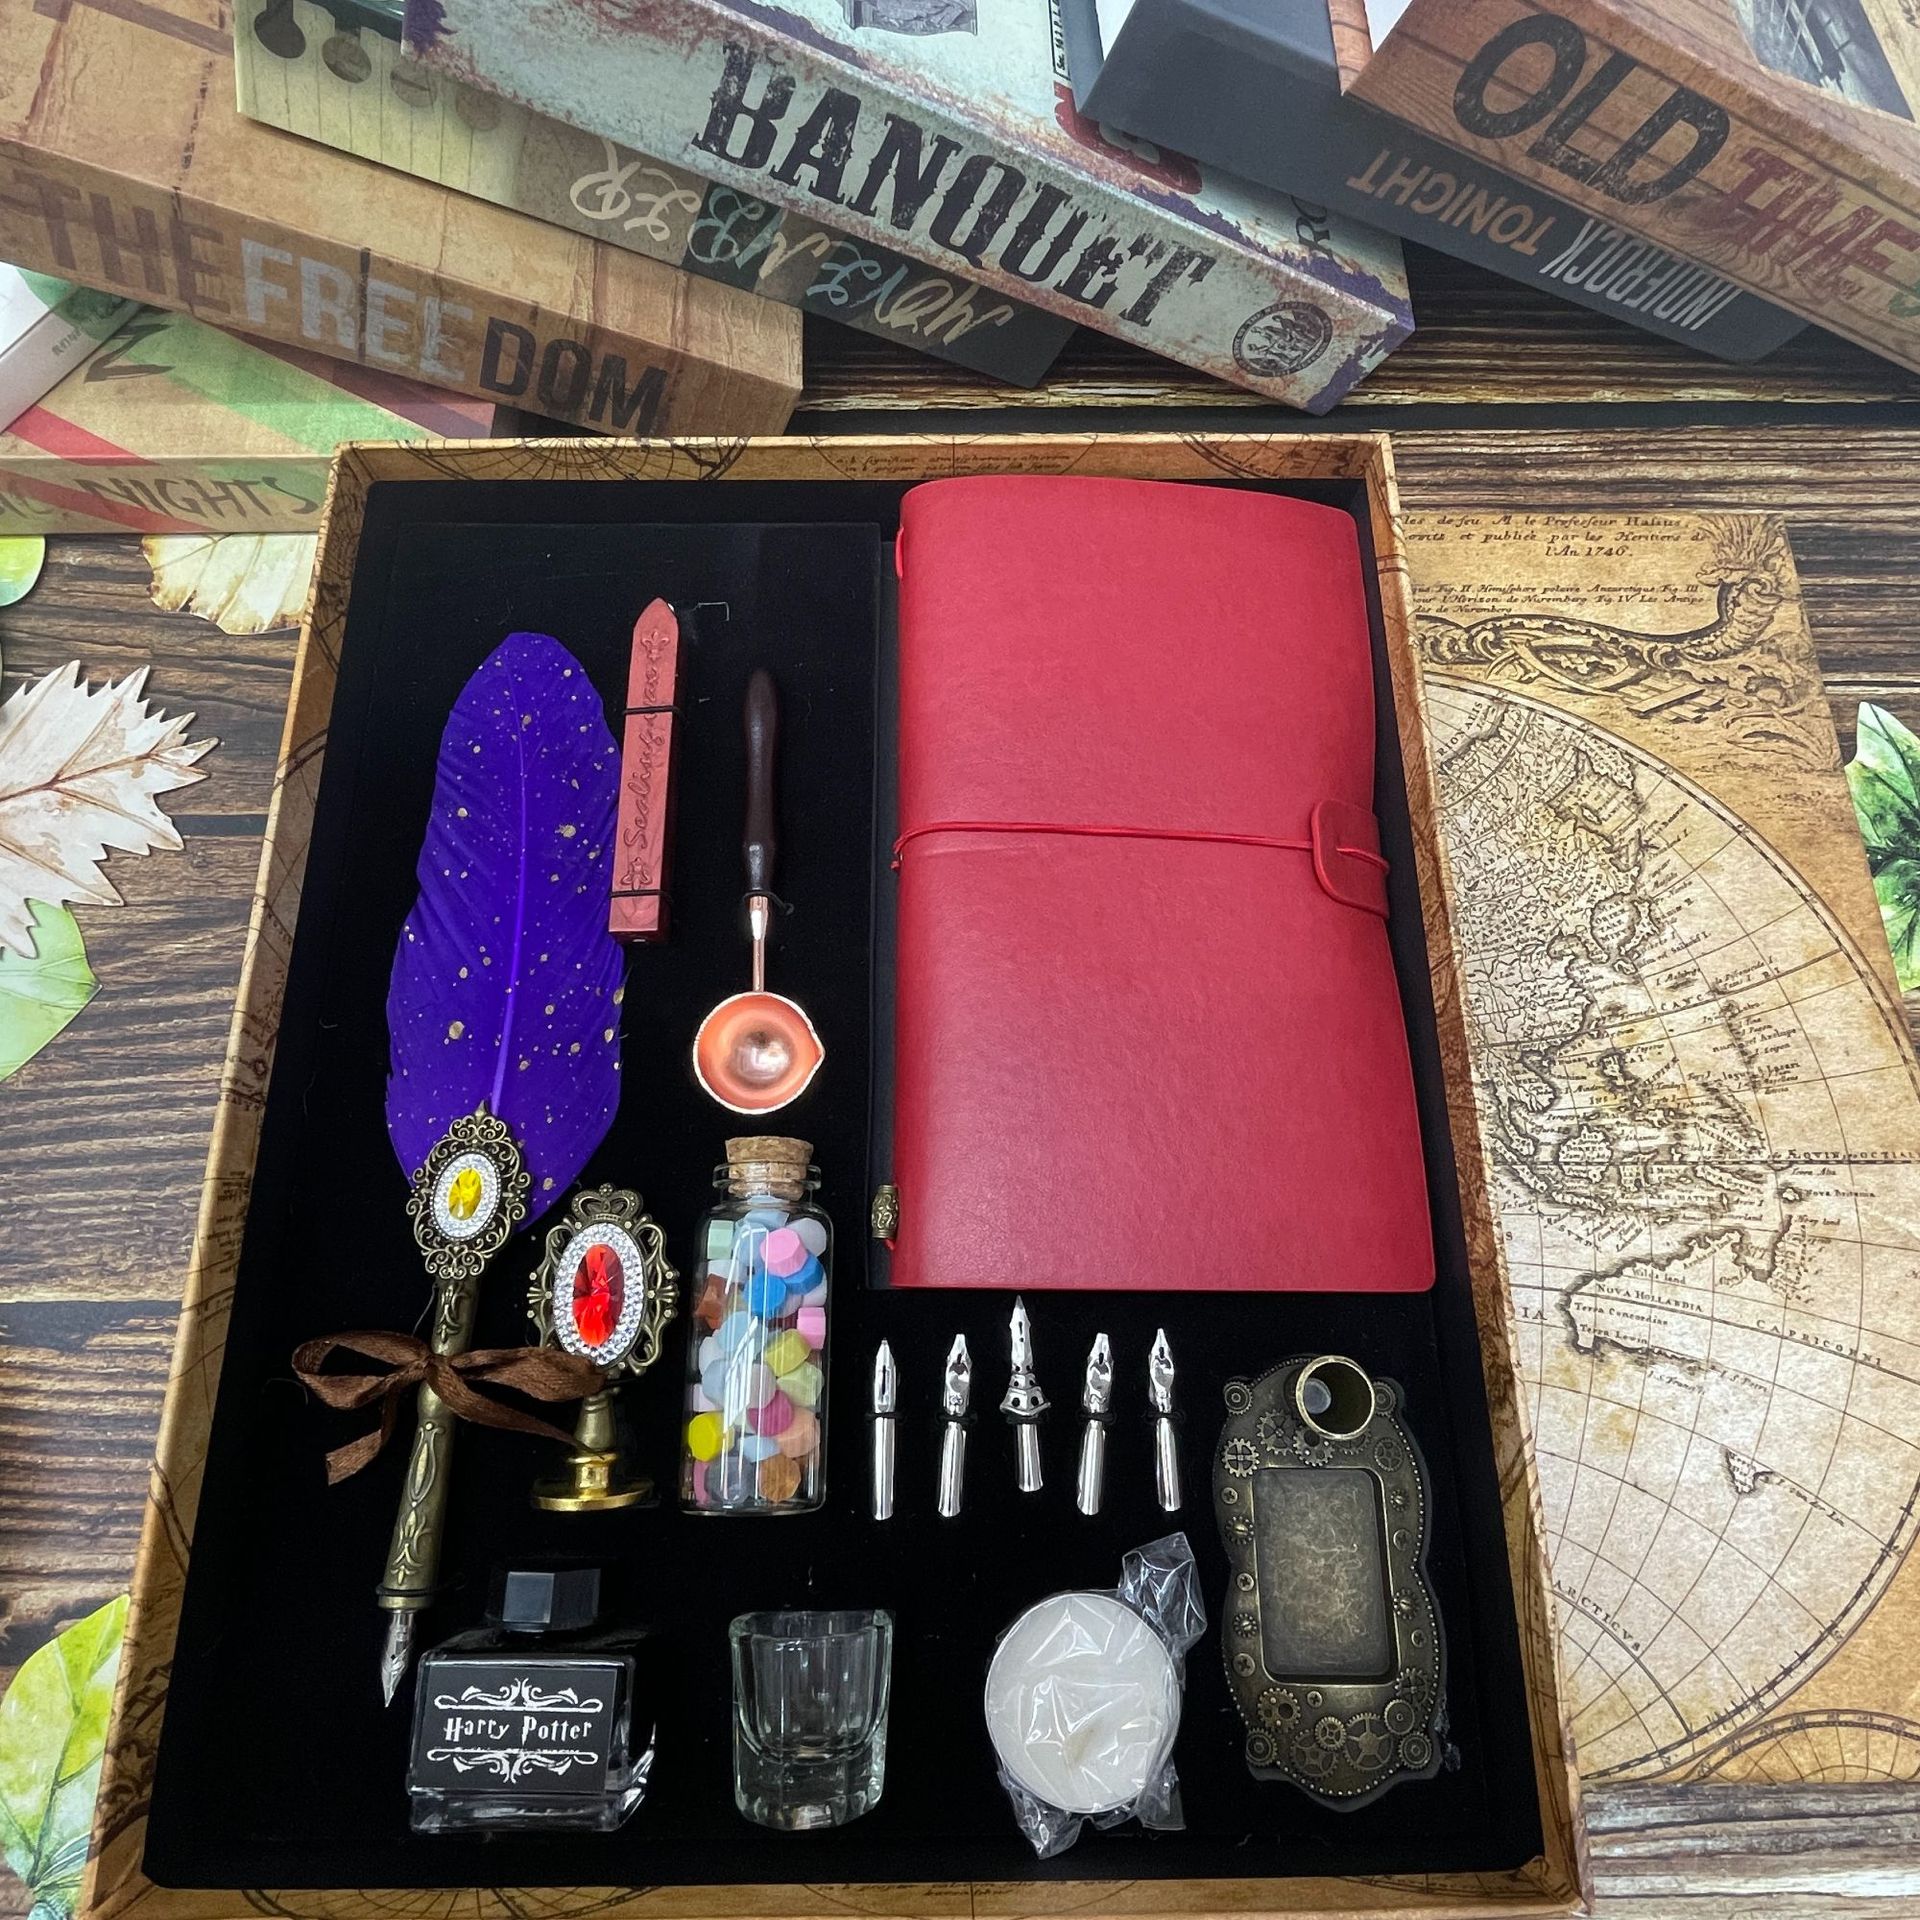 European-Style Retro Gold Feather Notebook Gift Box for Sending Presents Wax Seal Base Dipped in Water Pen Kit Wholesale